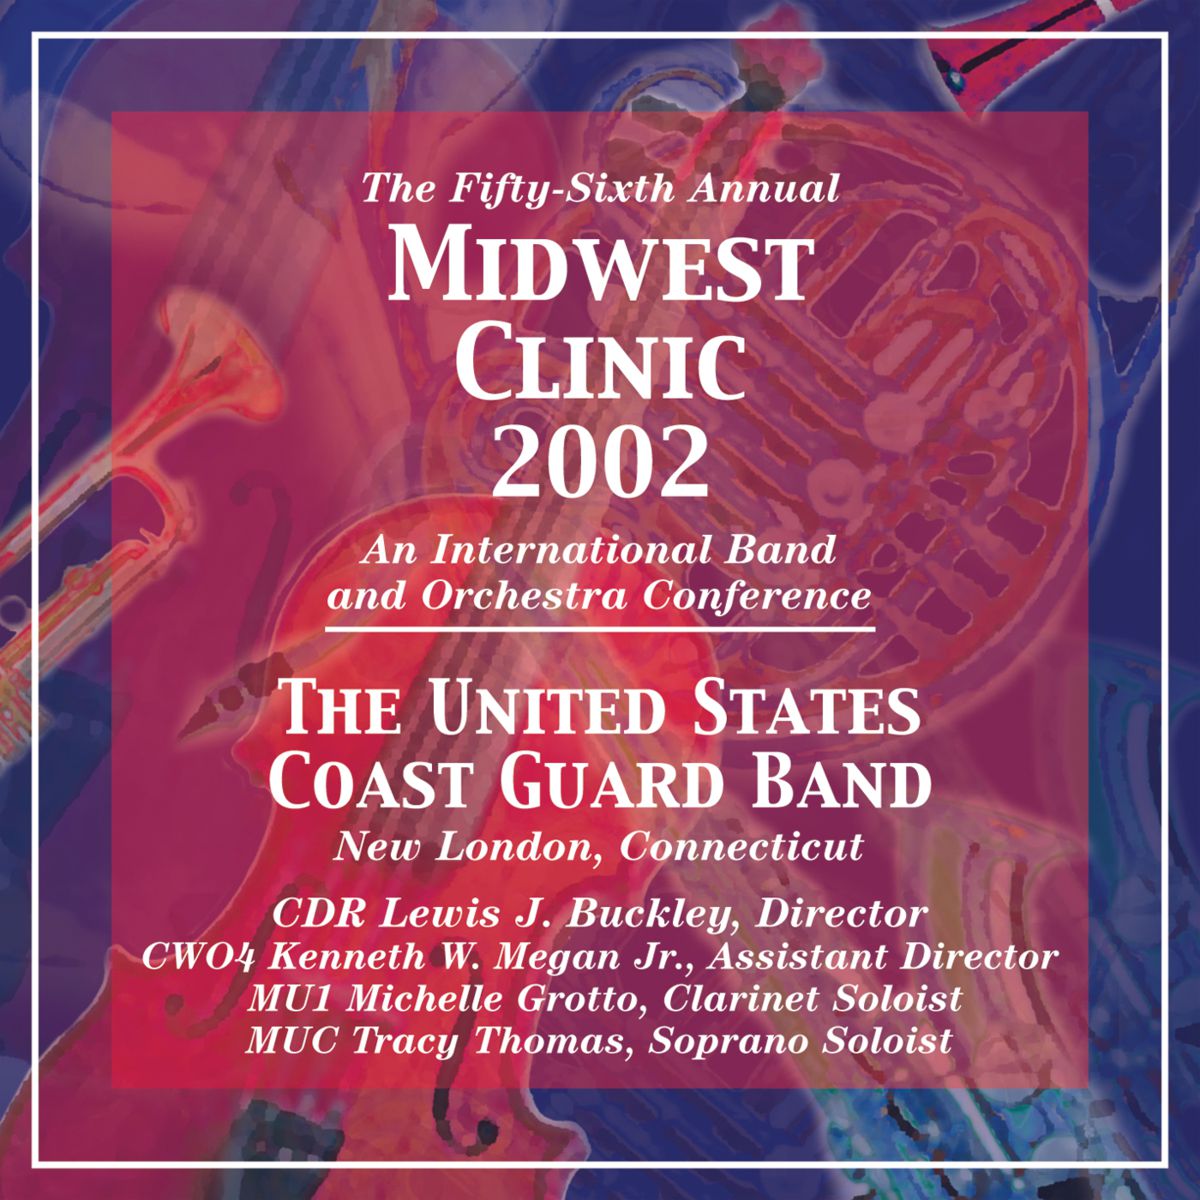 2002 Midwest Clinic: The United States Coast Guard Band - clicca qui